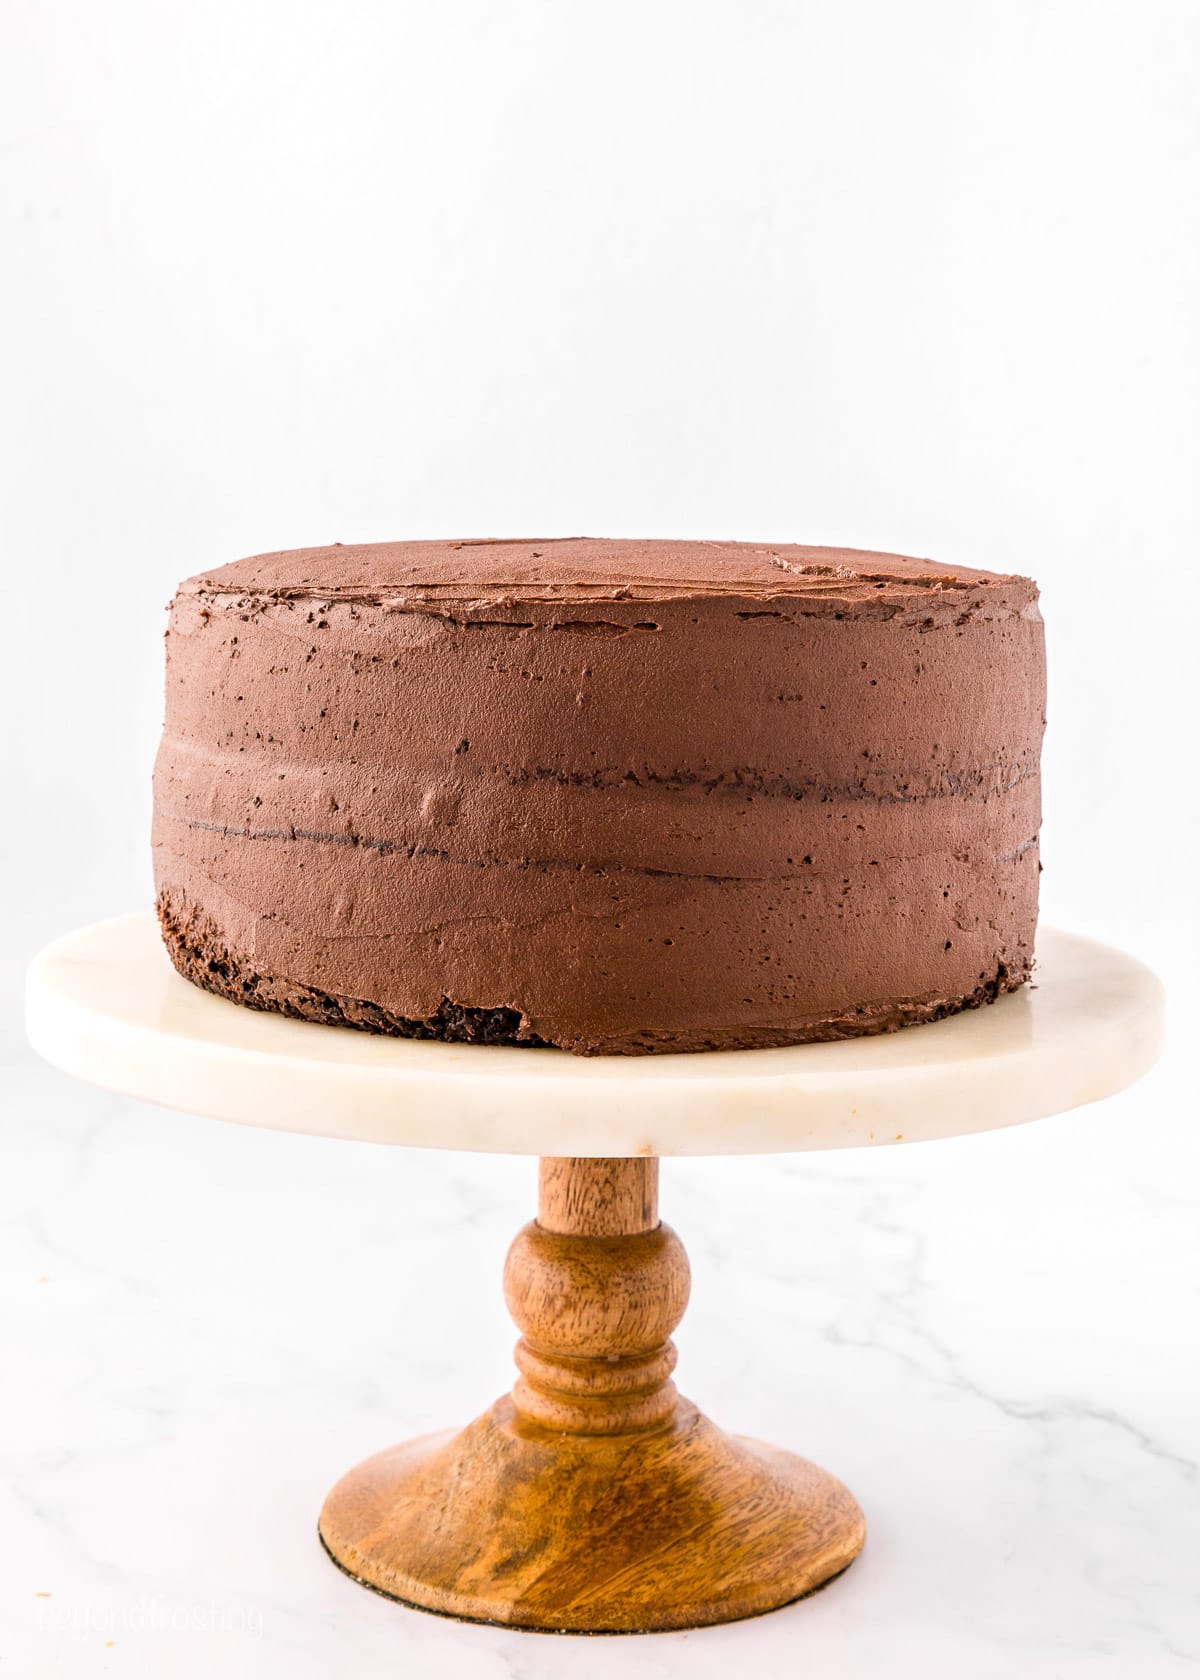 A two-layer chocolate cake frosted with chocolate frosting on a cake stand with a wooden base.